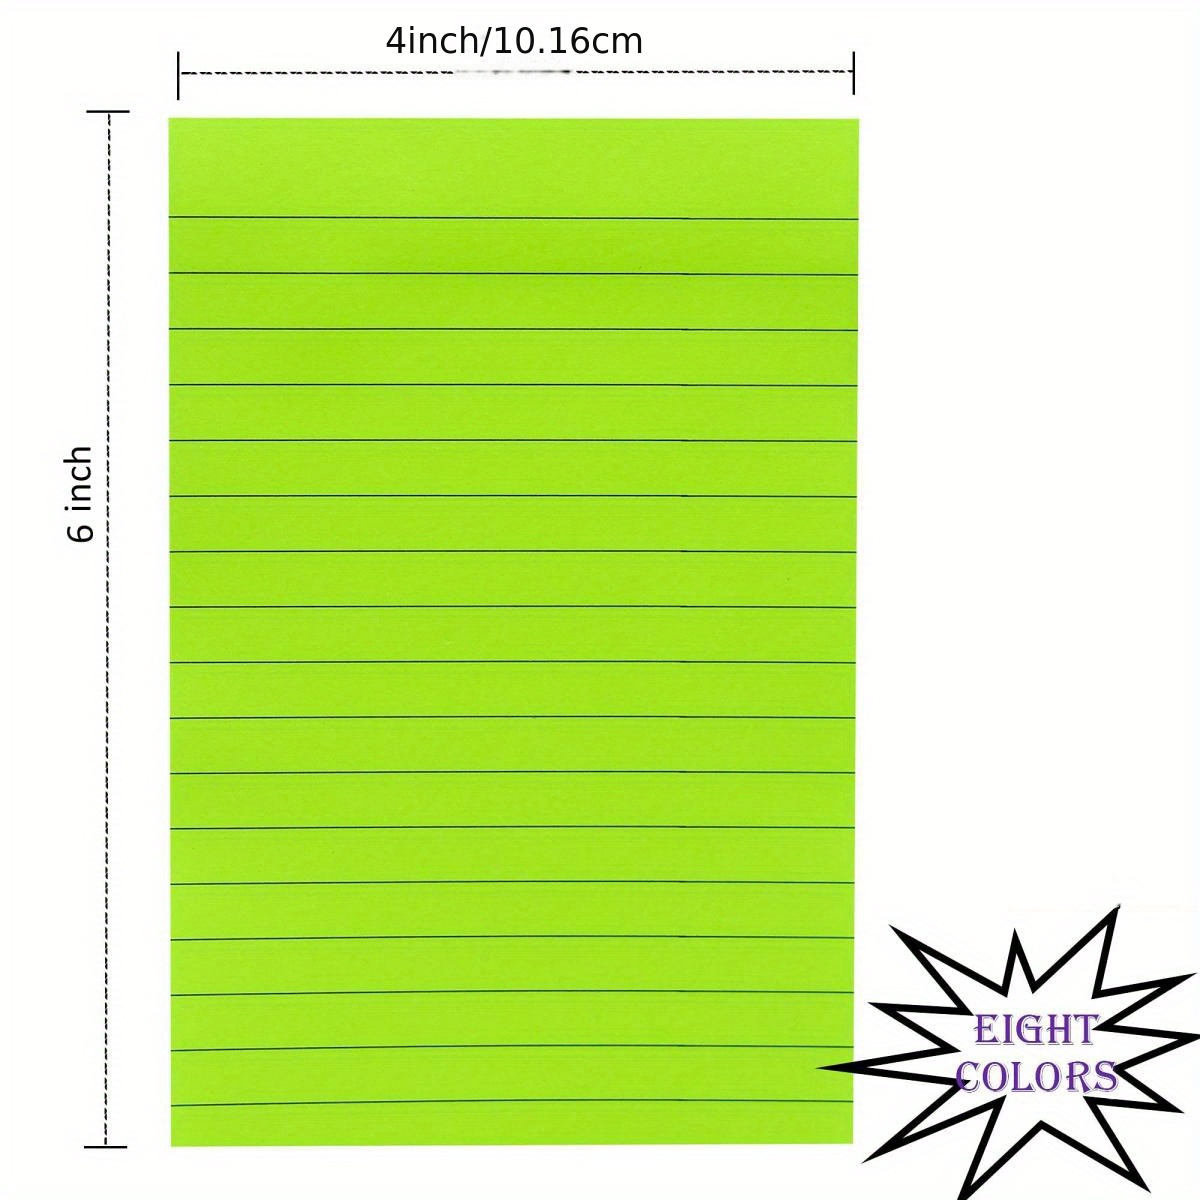 Kokuyo Tack Memo N Quick Index Sticky Notes - Large 2.5 cm x 2.5 cm - Green - Pack of 2